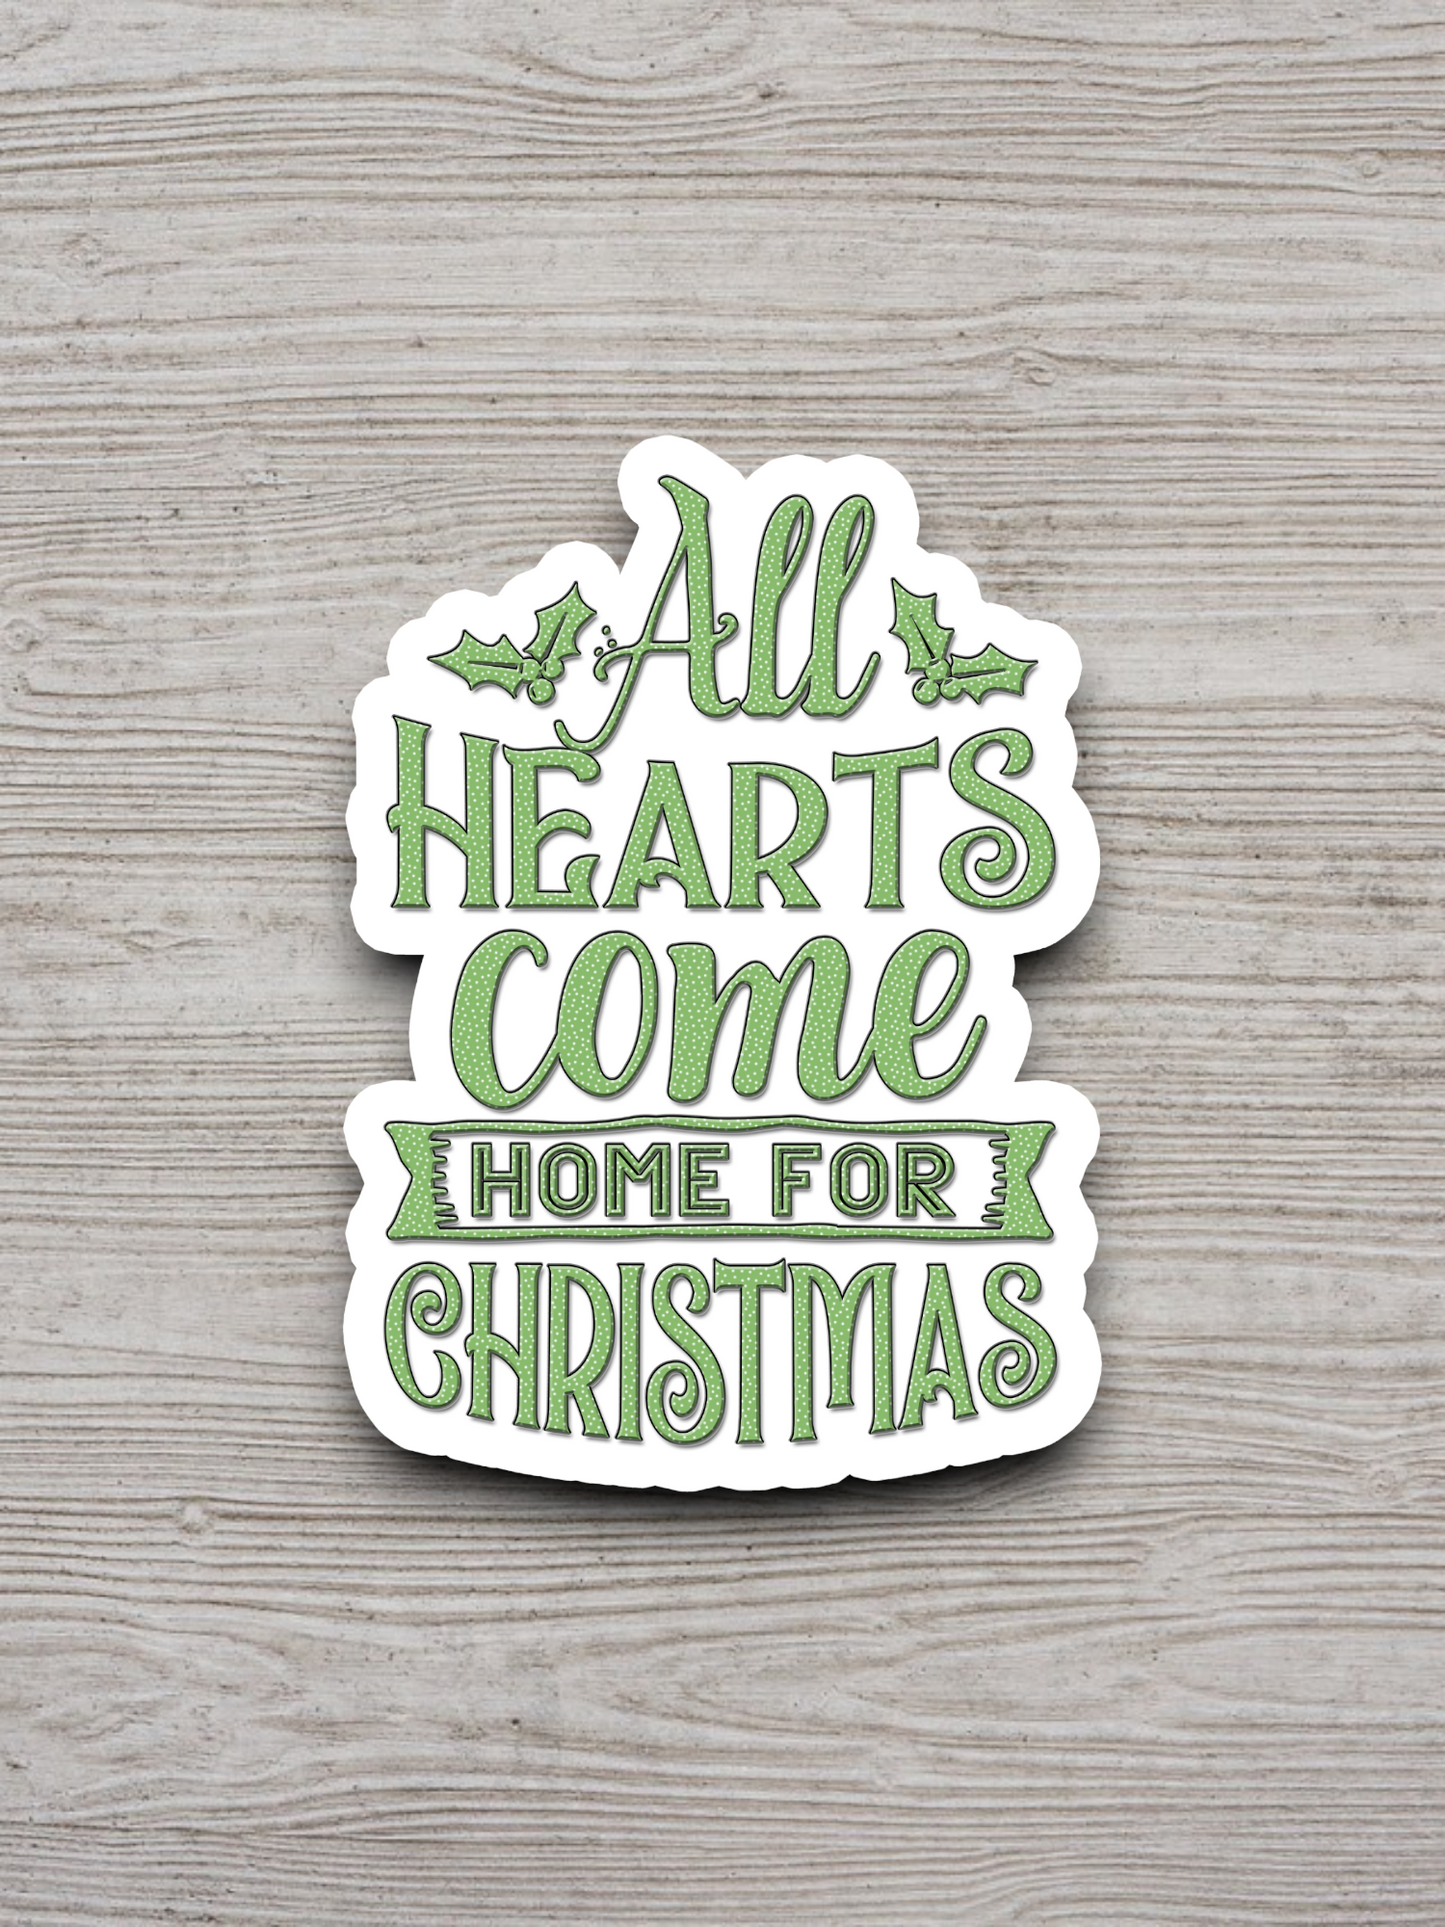 All Hearts Come Home for Christmas - Holiday Sticker